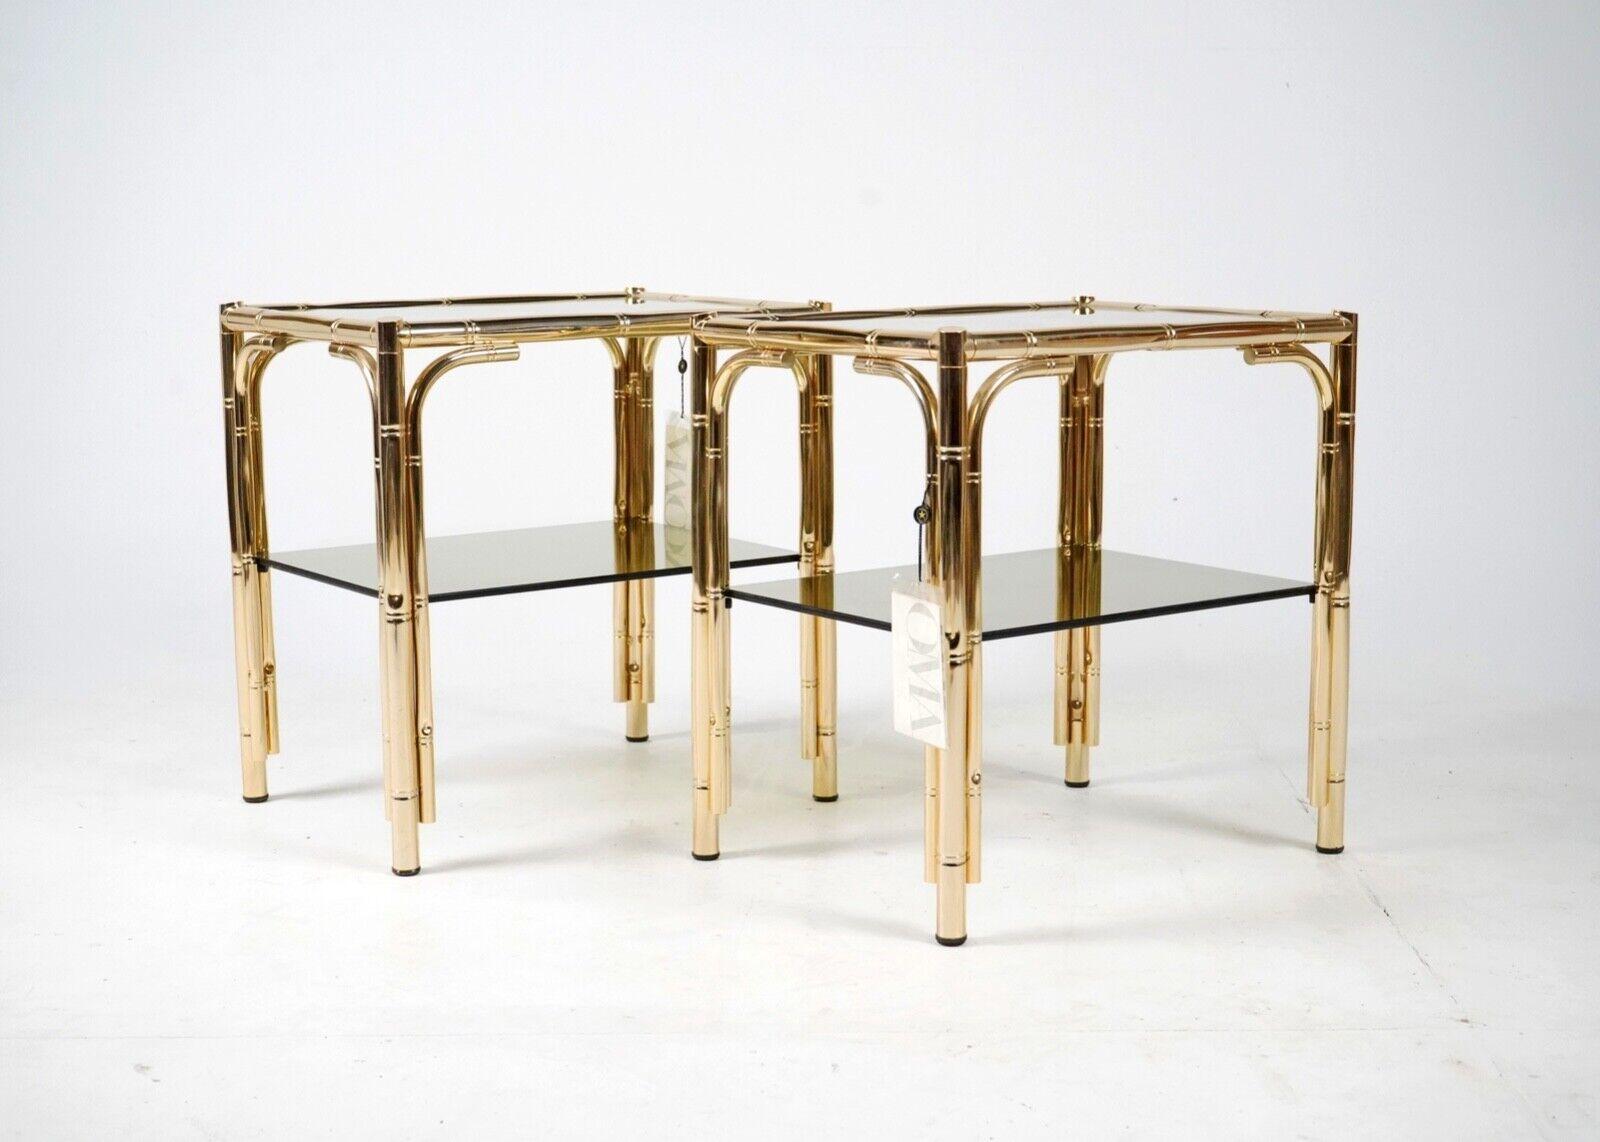 A fun pair of gold plated 24c Italian bedside tables with smoked glass top and shelf. A striking look with faux bamboo detailing and a quality piece with original paperwork/leaflet. 

There is a matching double bed frame (please see other listings